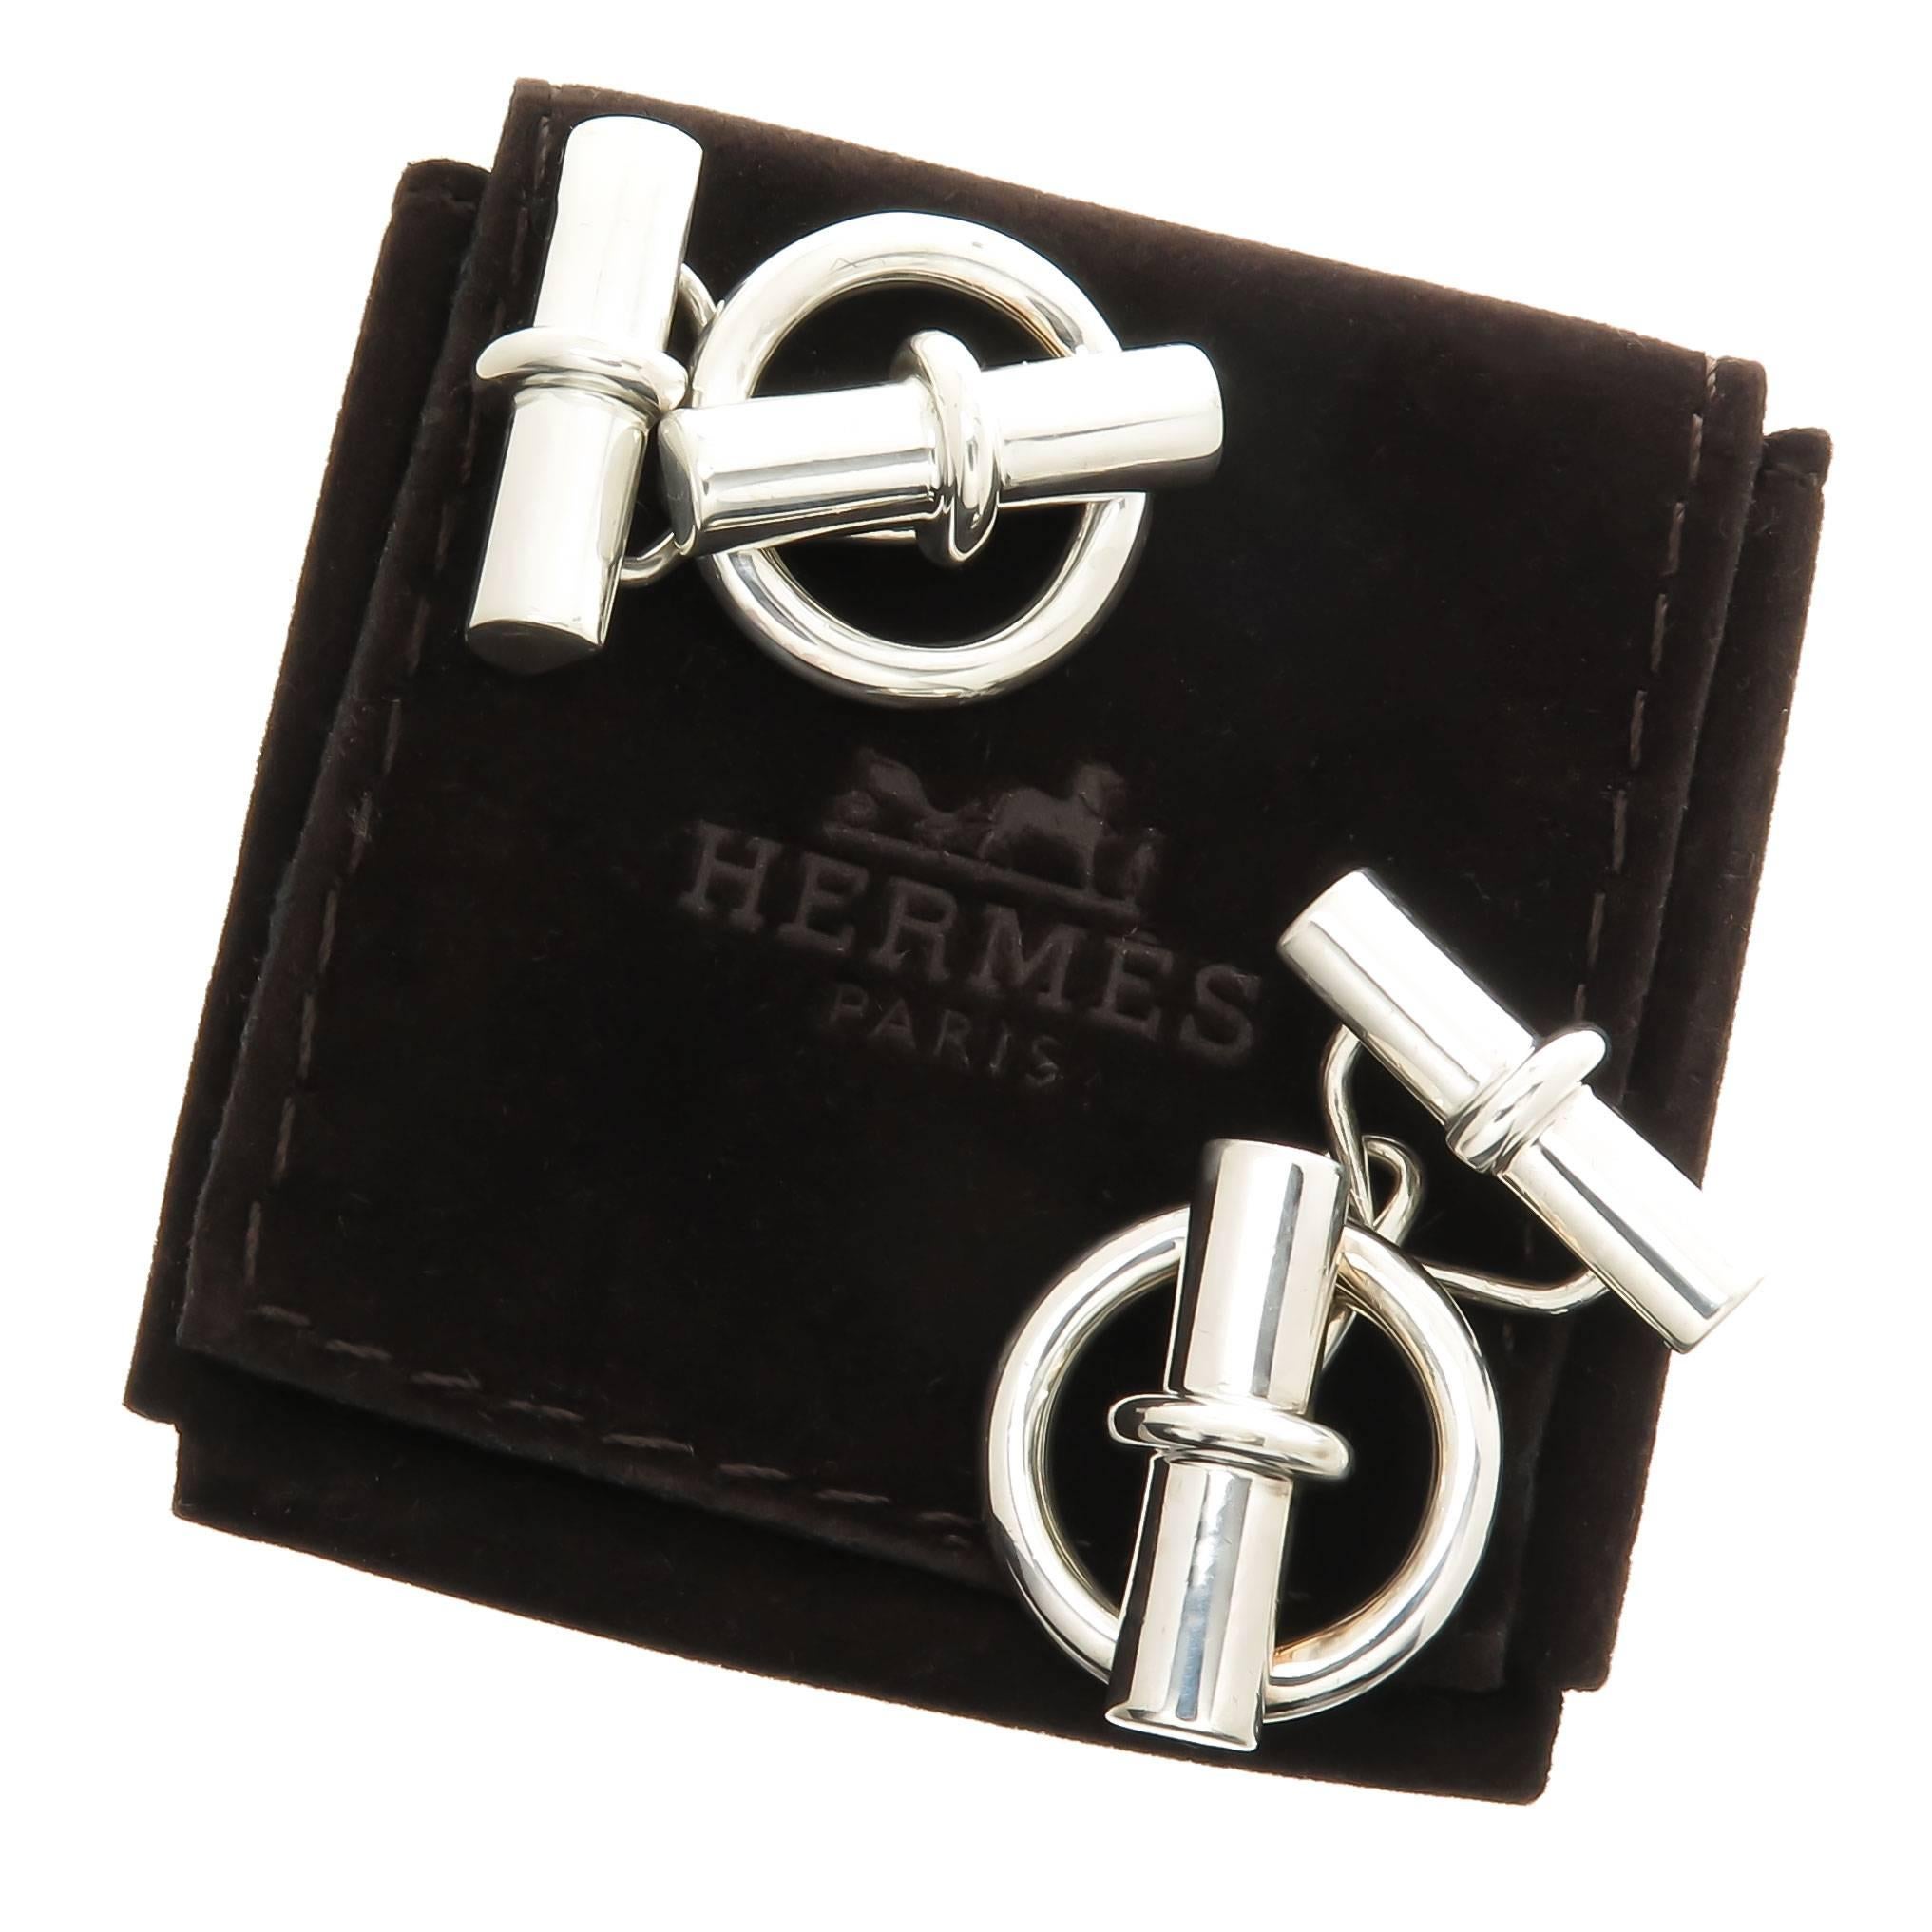 Circa 2000 Hermes Sterling Silver Chaine D Ancre Collection Cufflinks, measuring 5/8 inch in diameter and being of nice solid, heavy construction. Come in Original Hermes Pouch.